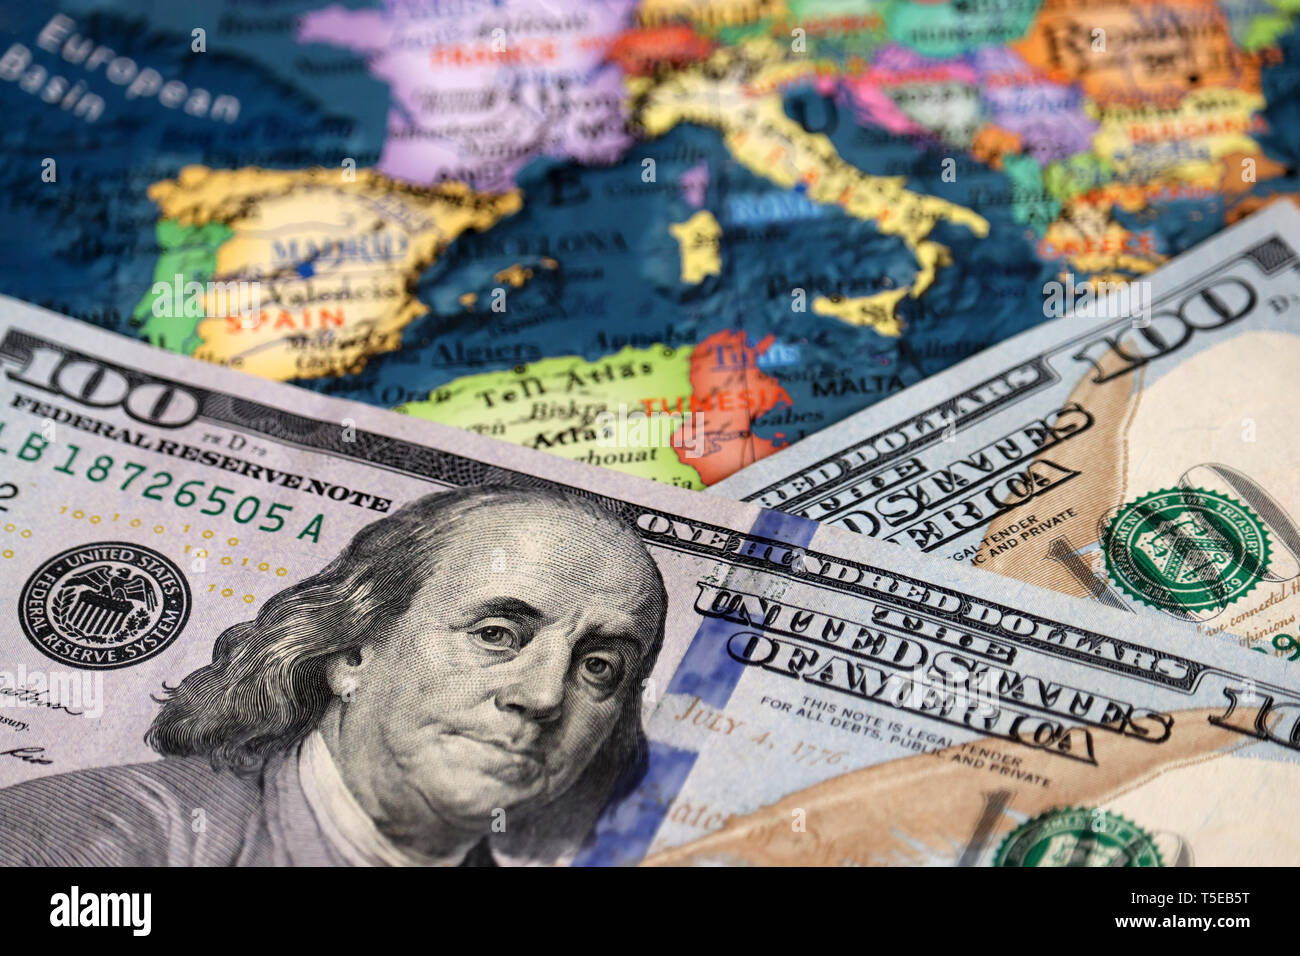 US dollars on the map of Europe. Concept of trade between the United States and Europe, exchange rate, tourism, american domination in EU Stock Photo